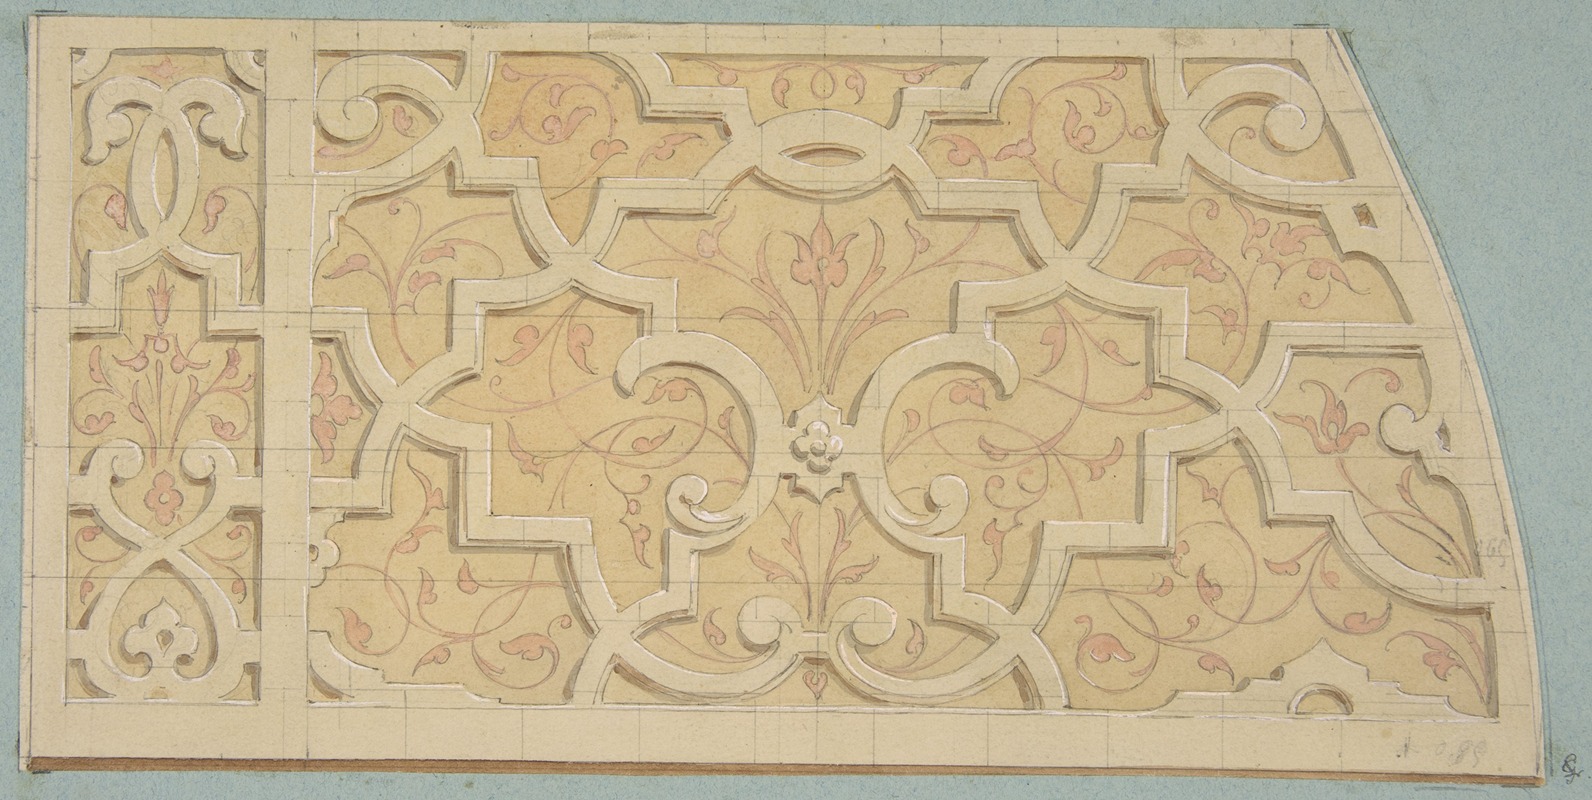 Jules-Edmond-Charles Lachaise - Design for the decoration of the stairway in the Chateau d’Ognon of M. de Machy (Oise, France)